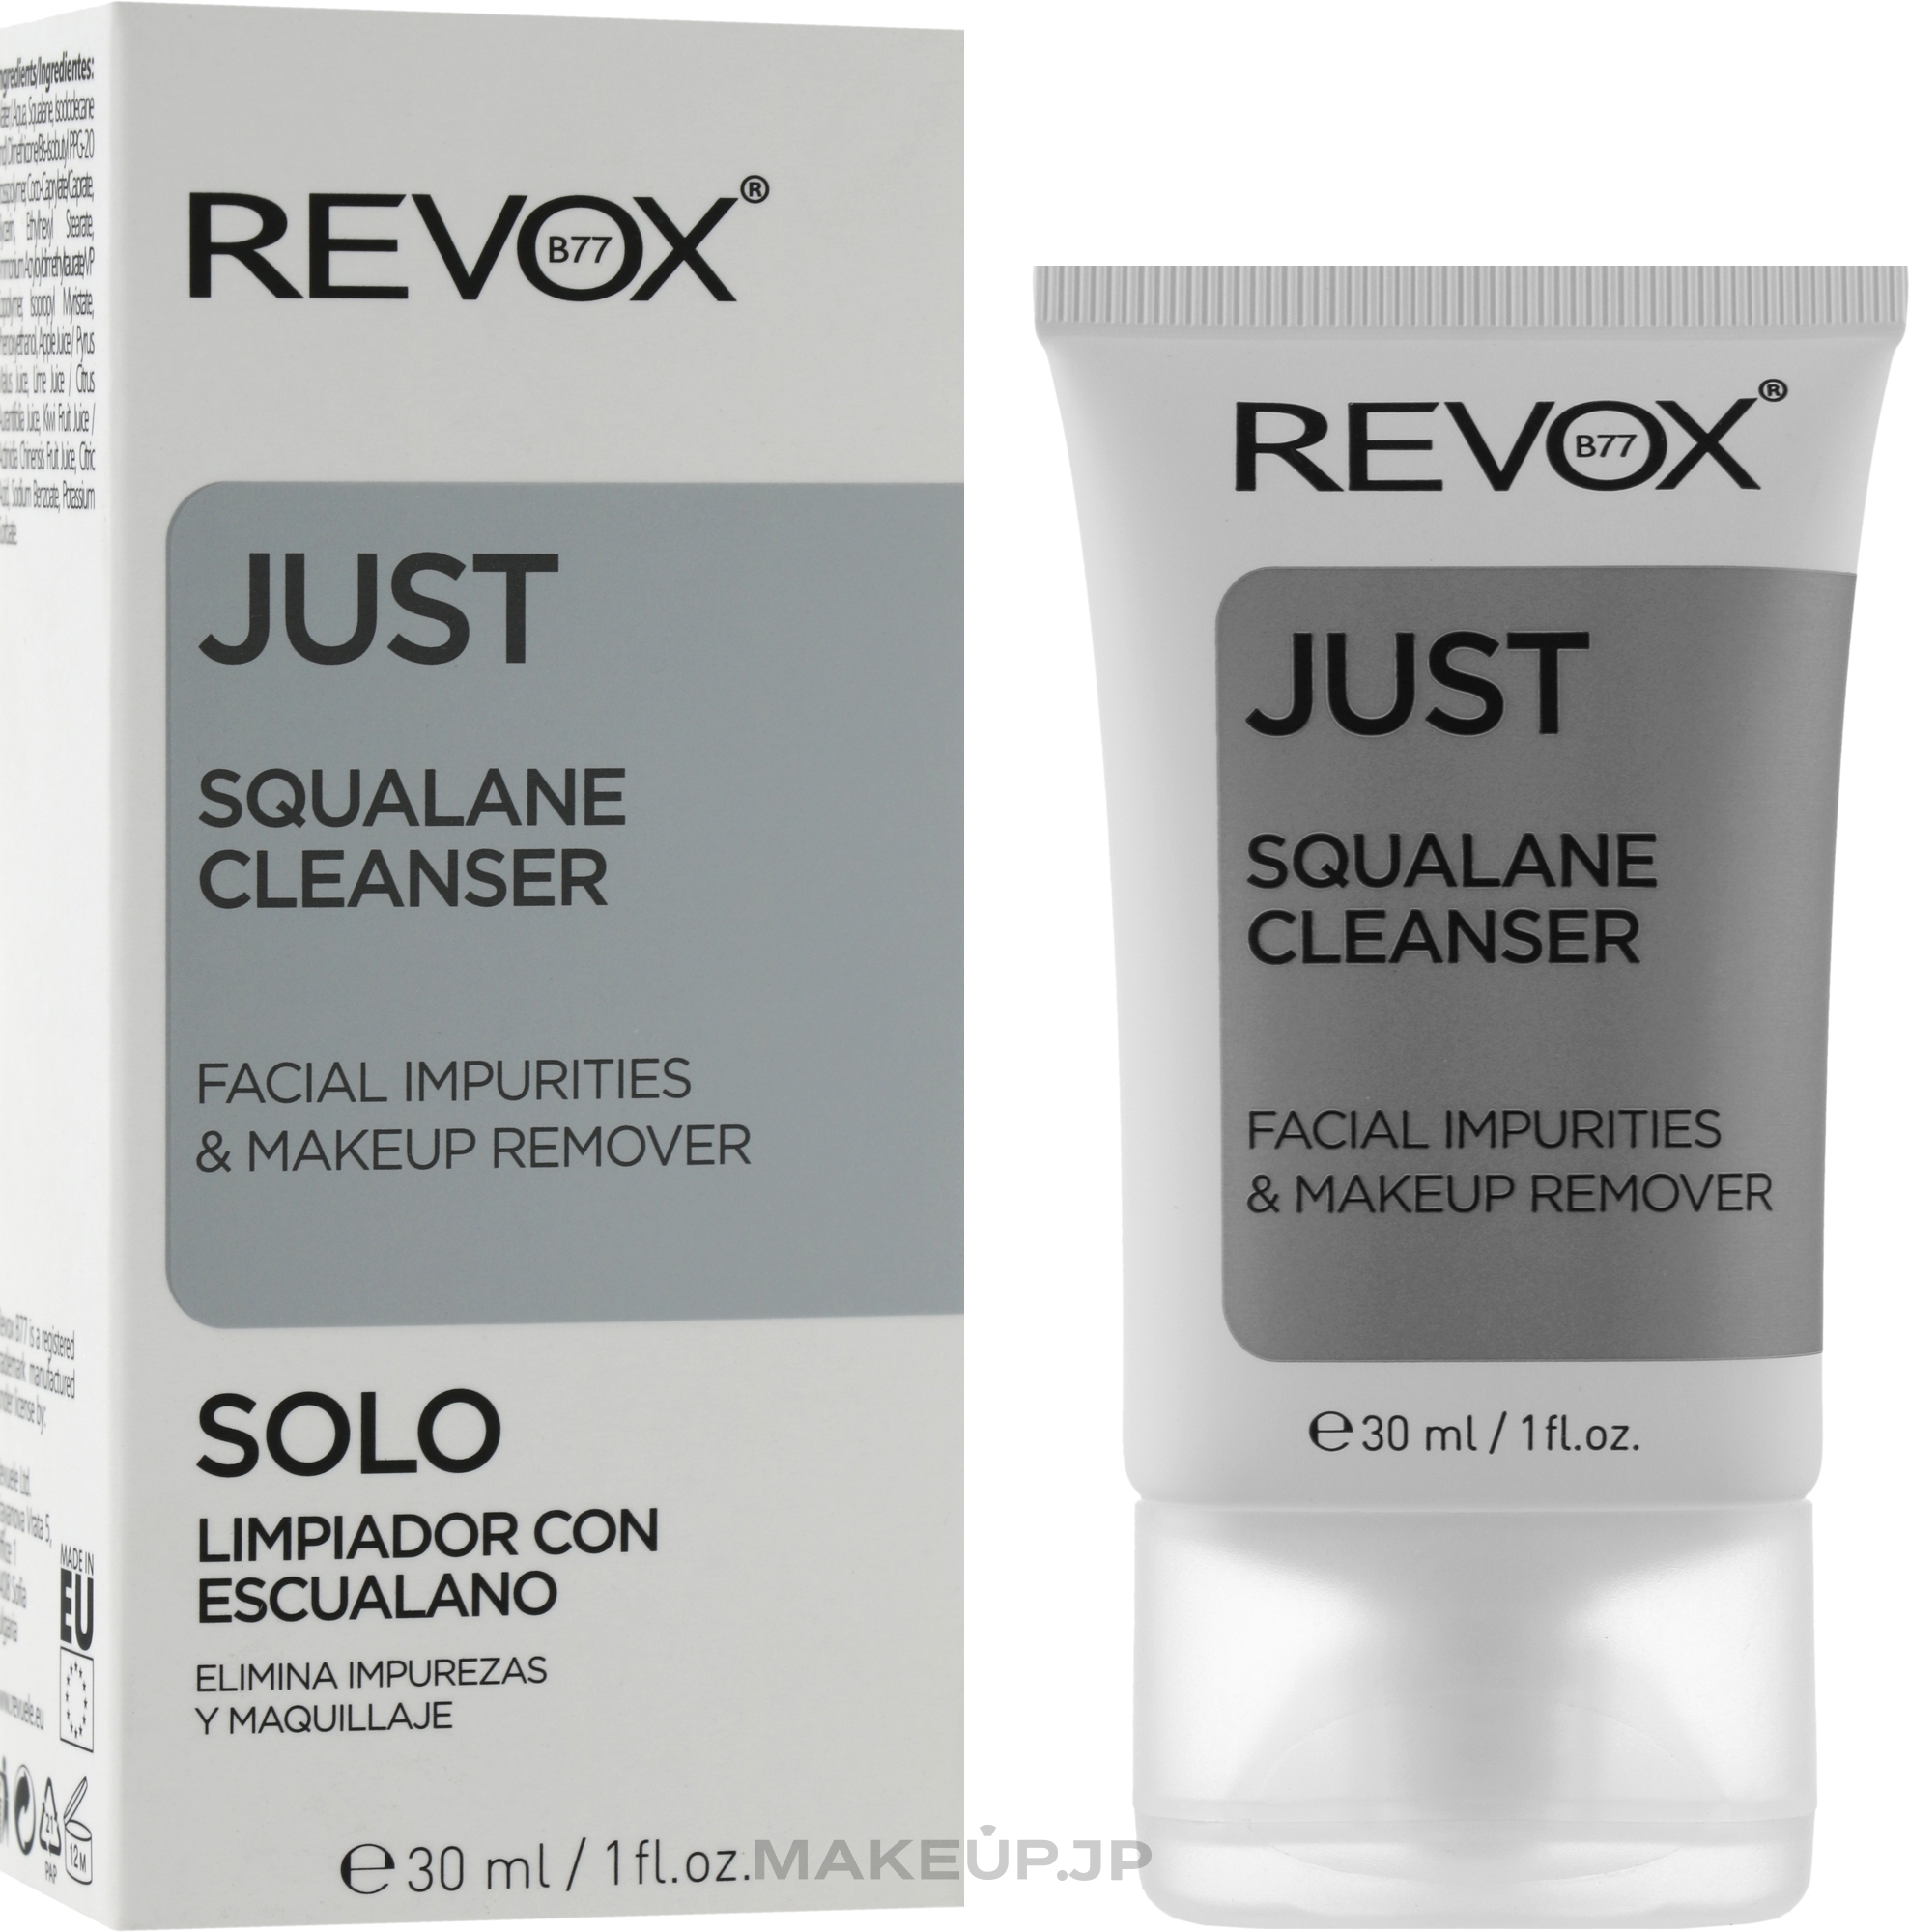 Squalane Cleanser for Impurities & Makeup Remover - Revox Just Squalane Cleanser Facial Impurities And Makeup Remover — photo 30 ml